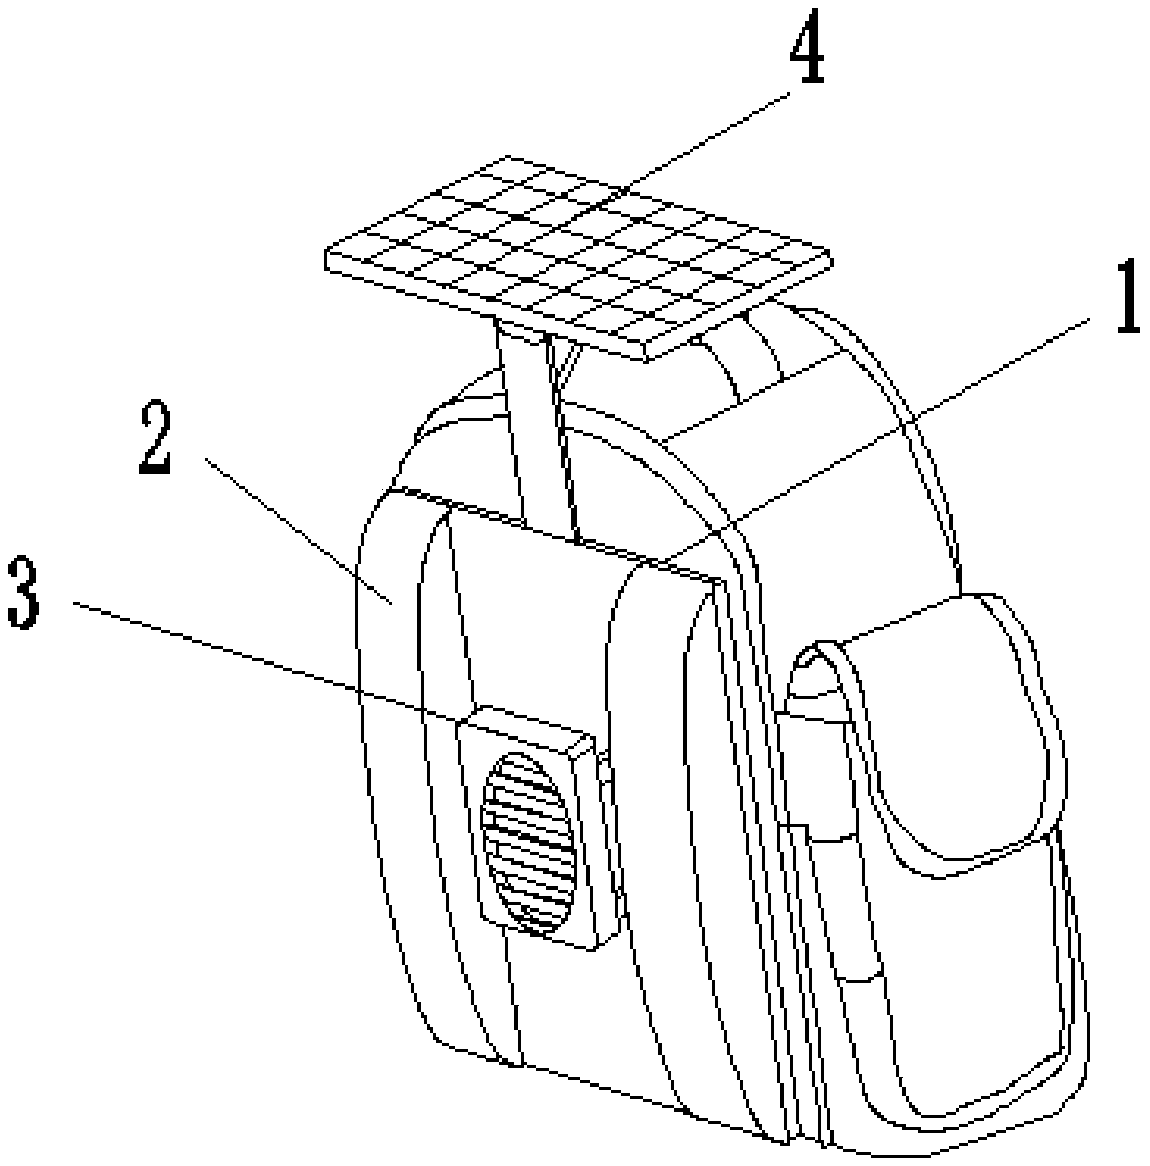 Backpack pad with lifesaving function